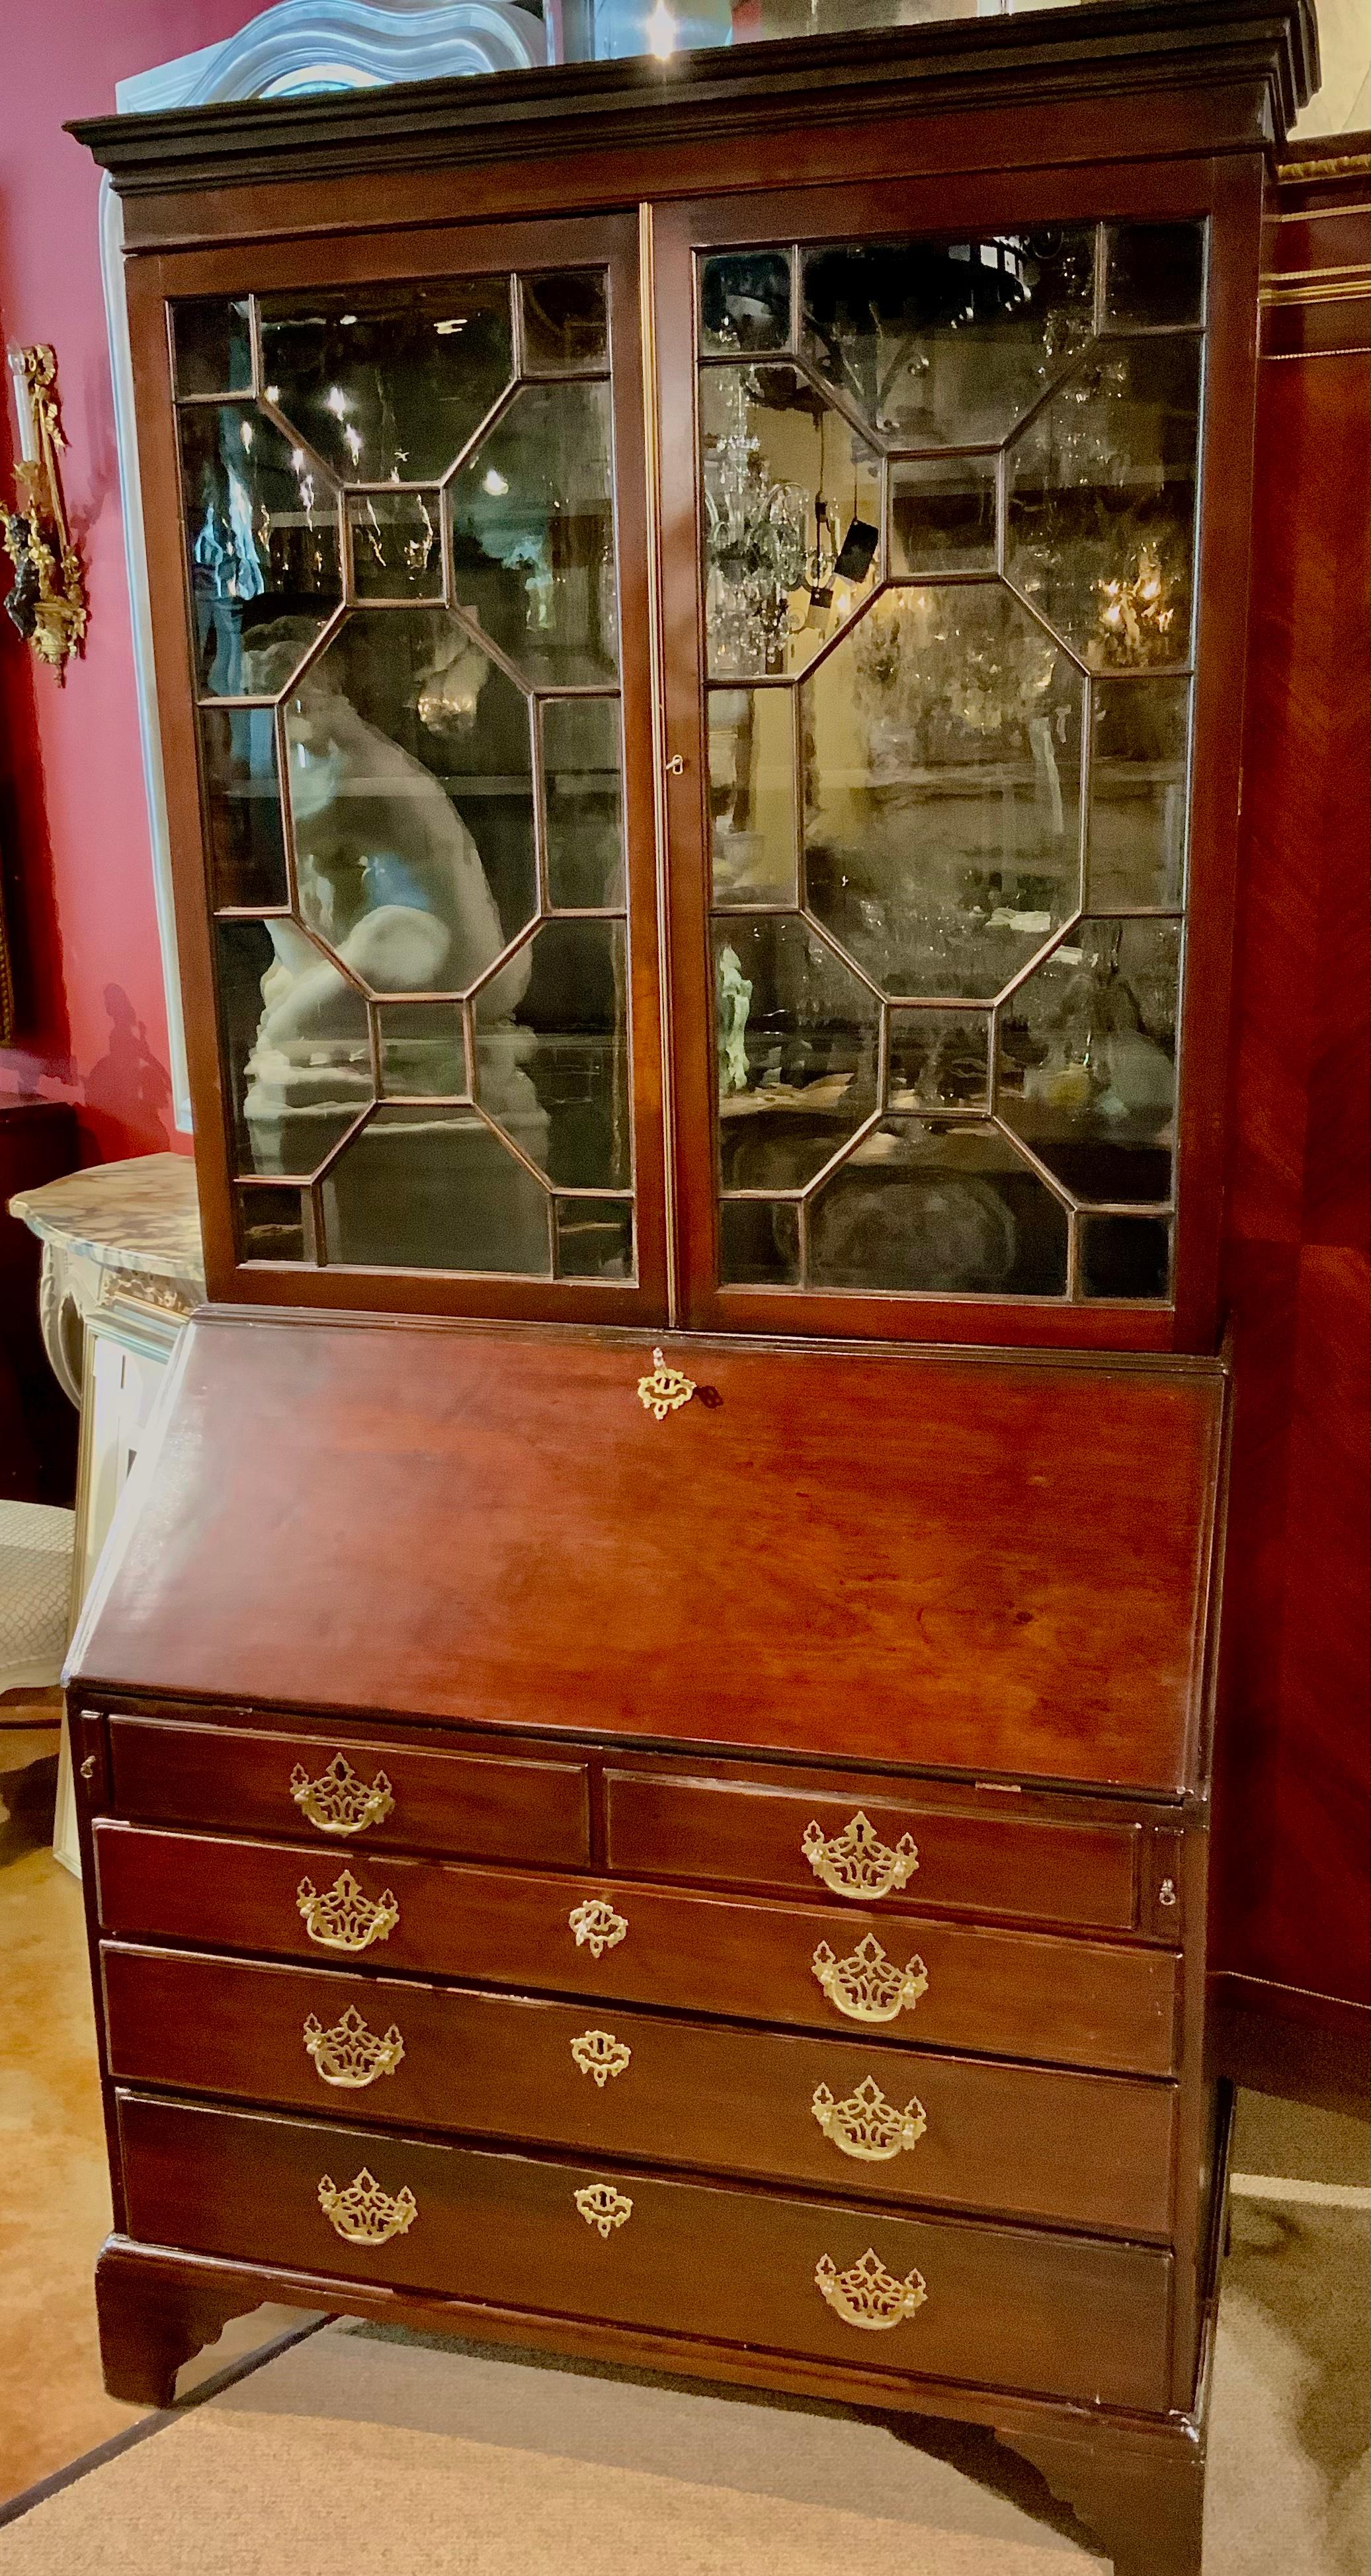 This exceptional mahogany secretary is from the late
18 th c. It has hinged doors that open wide to interior
Display with shelves that are adjustable. The antique
Glass is in a geometric paned configuration. The drop
Front opens out to rest on